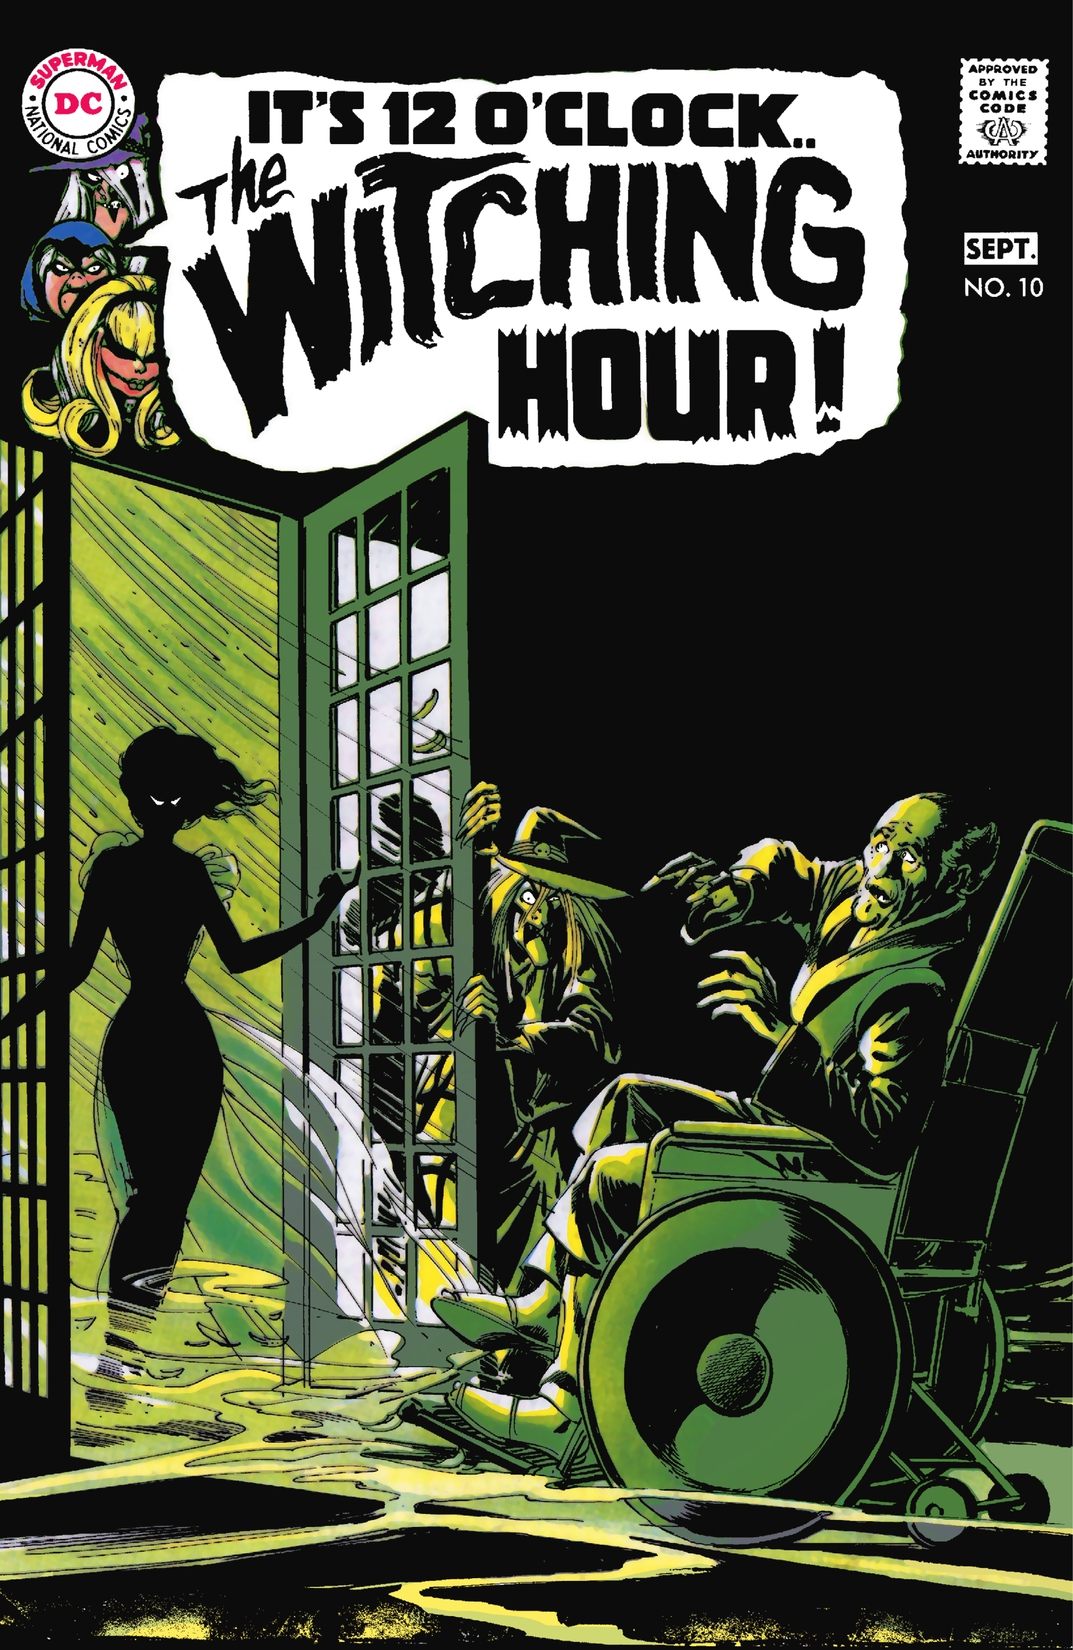 The Witching Hour #10 preview images